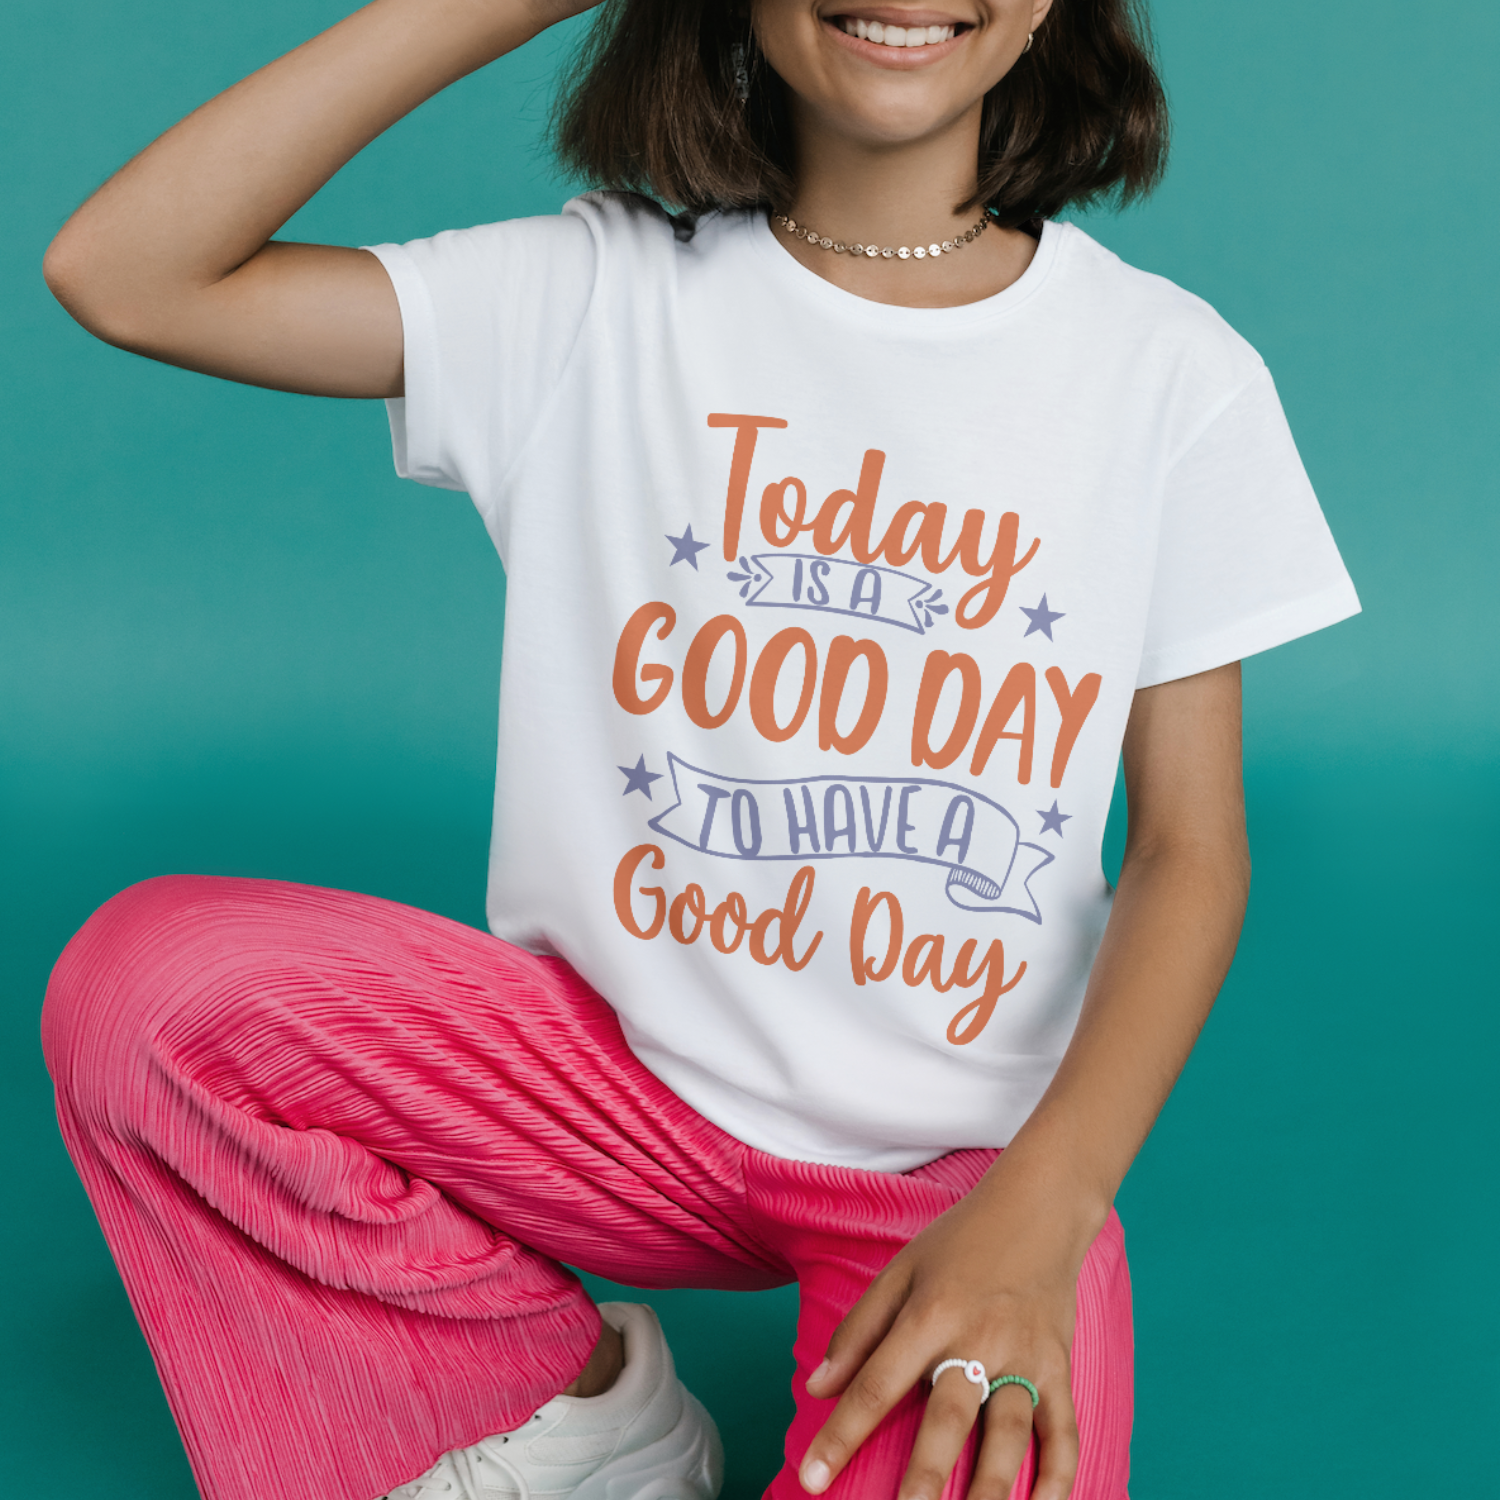 Today is a good day to have a good day SVG | Digital Download | Cut File | SVG - Only The Sweet Stuff